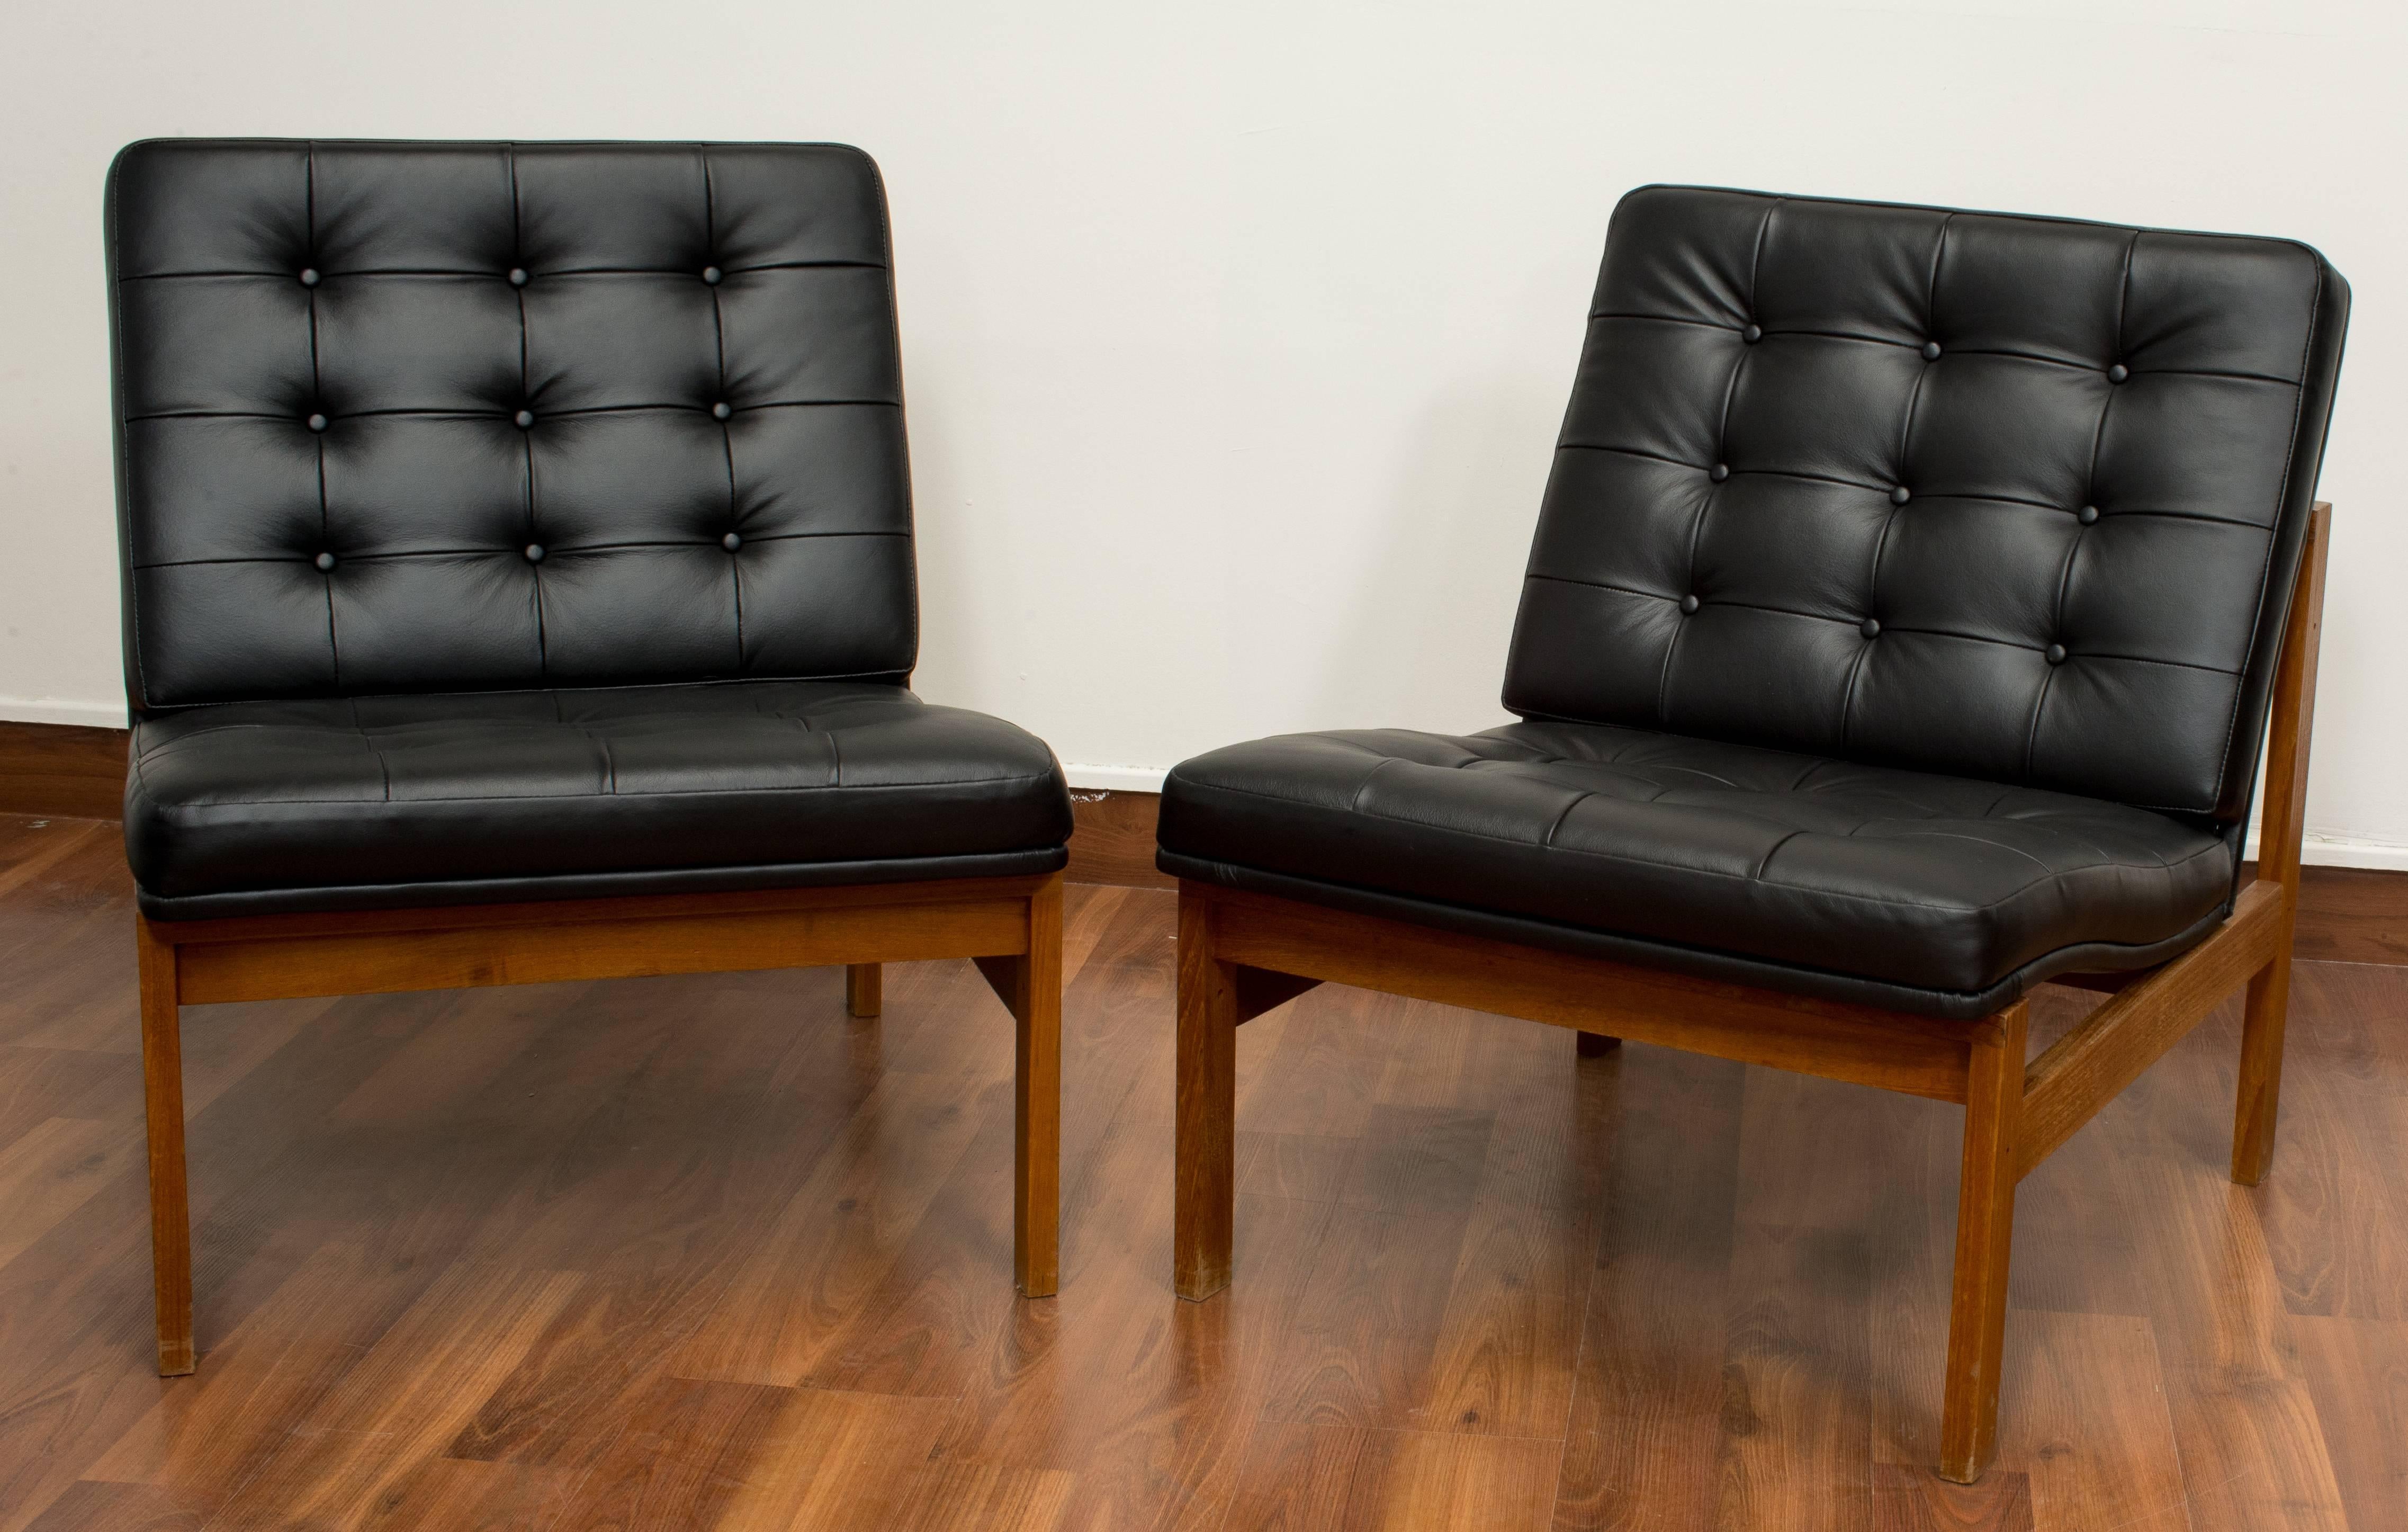 Modular Chairs of Teak Covered with Black, Buttoned Leather 4